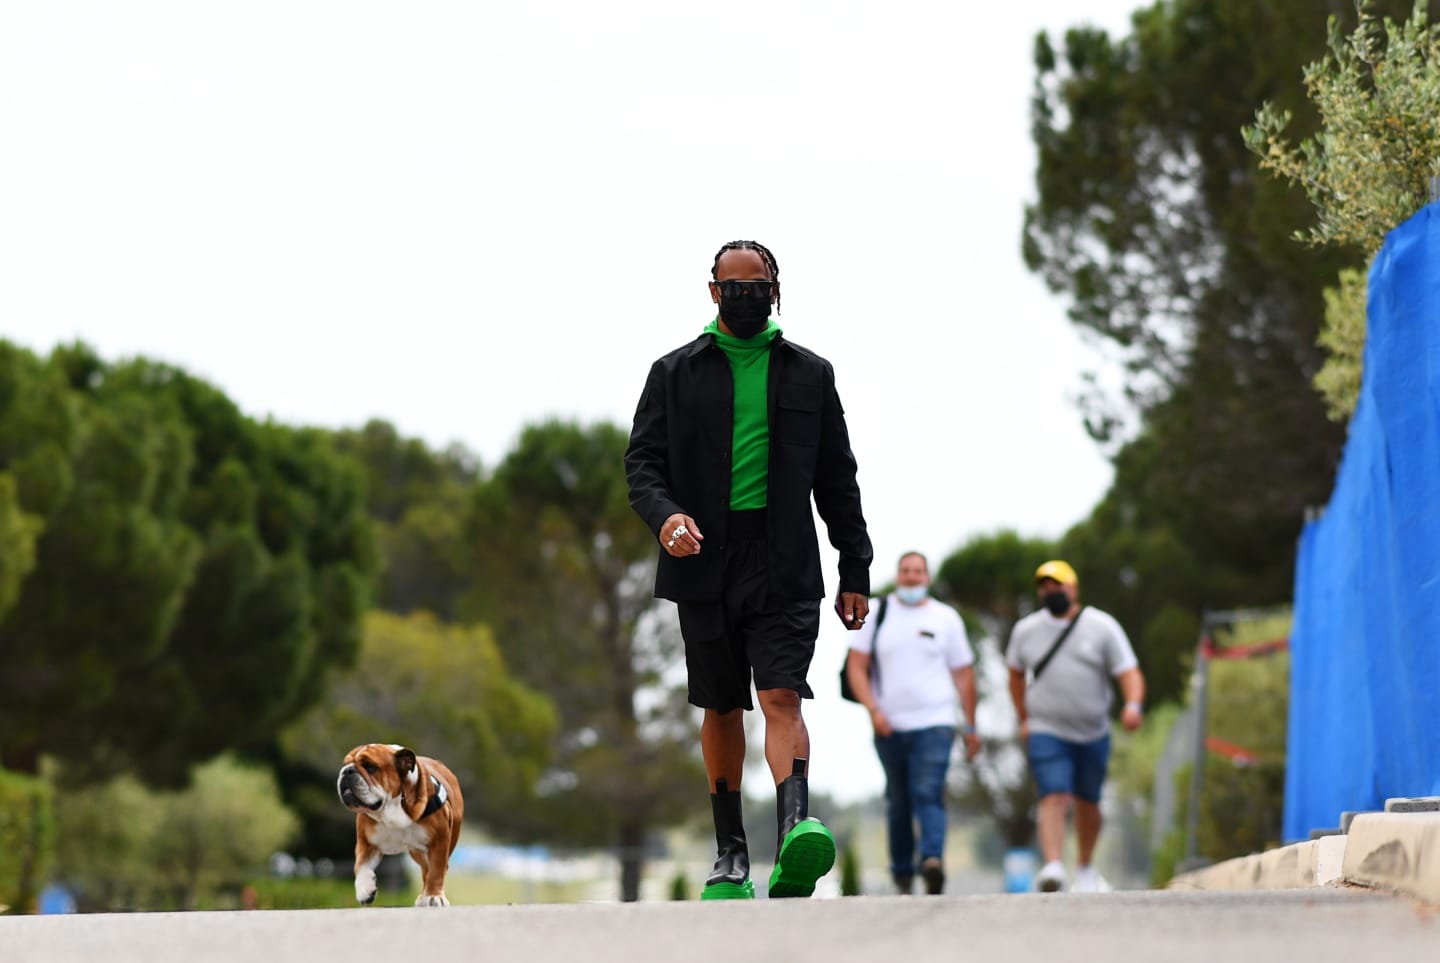 LE CASTELLET, FRANCE - JUNE 17: Lewis Hamilton of Great Britain and Mercedes GP walks in the